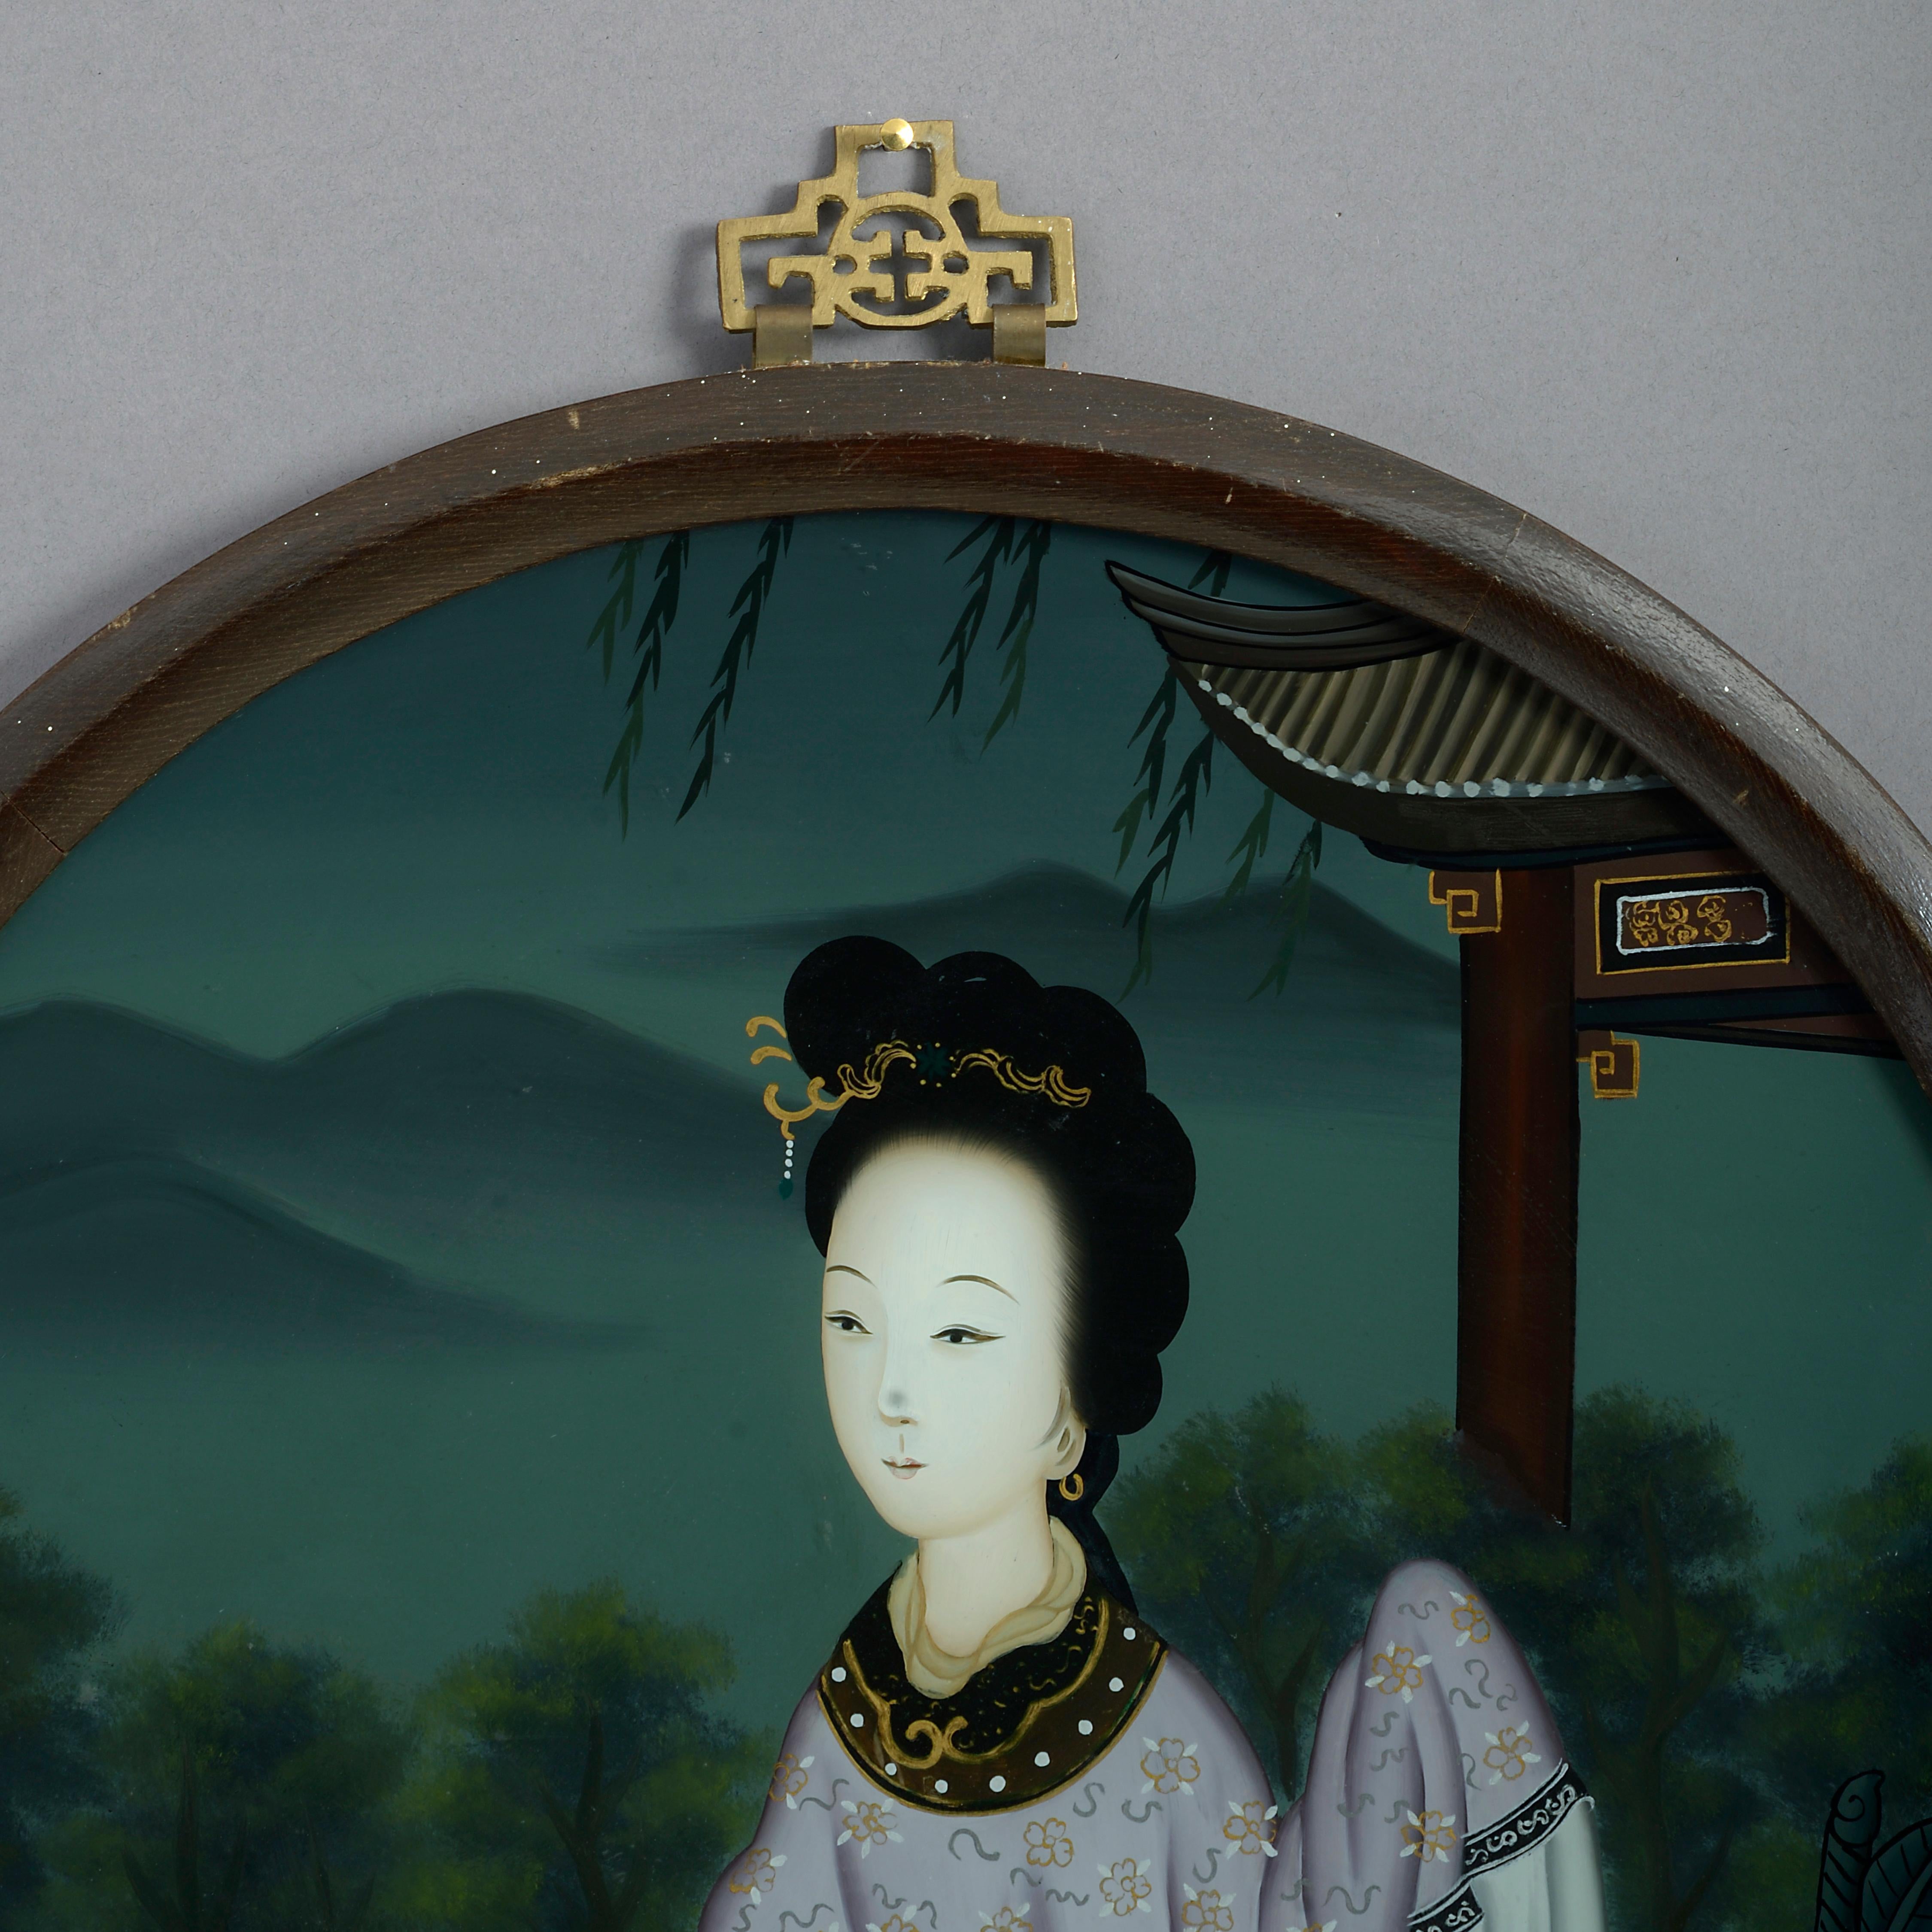 A late 19th century reverse glass painted portrait of a lady, by a pagoda within a mountainous landscape. Set within a circular wooden frame with pierced brass hanging plate.